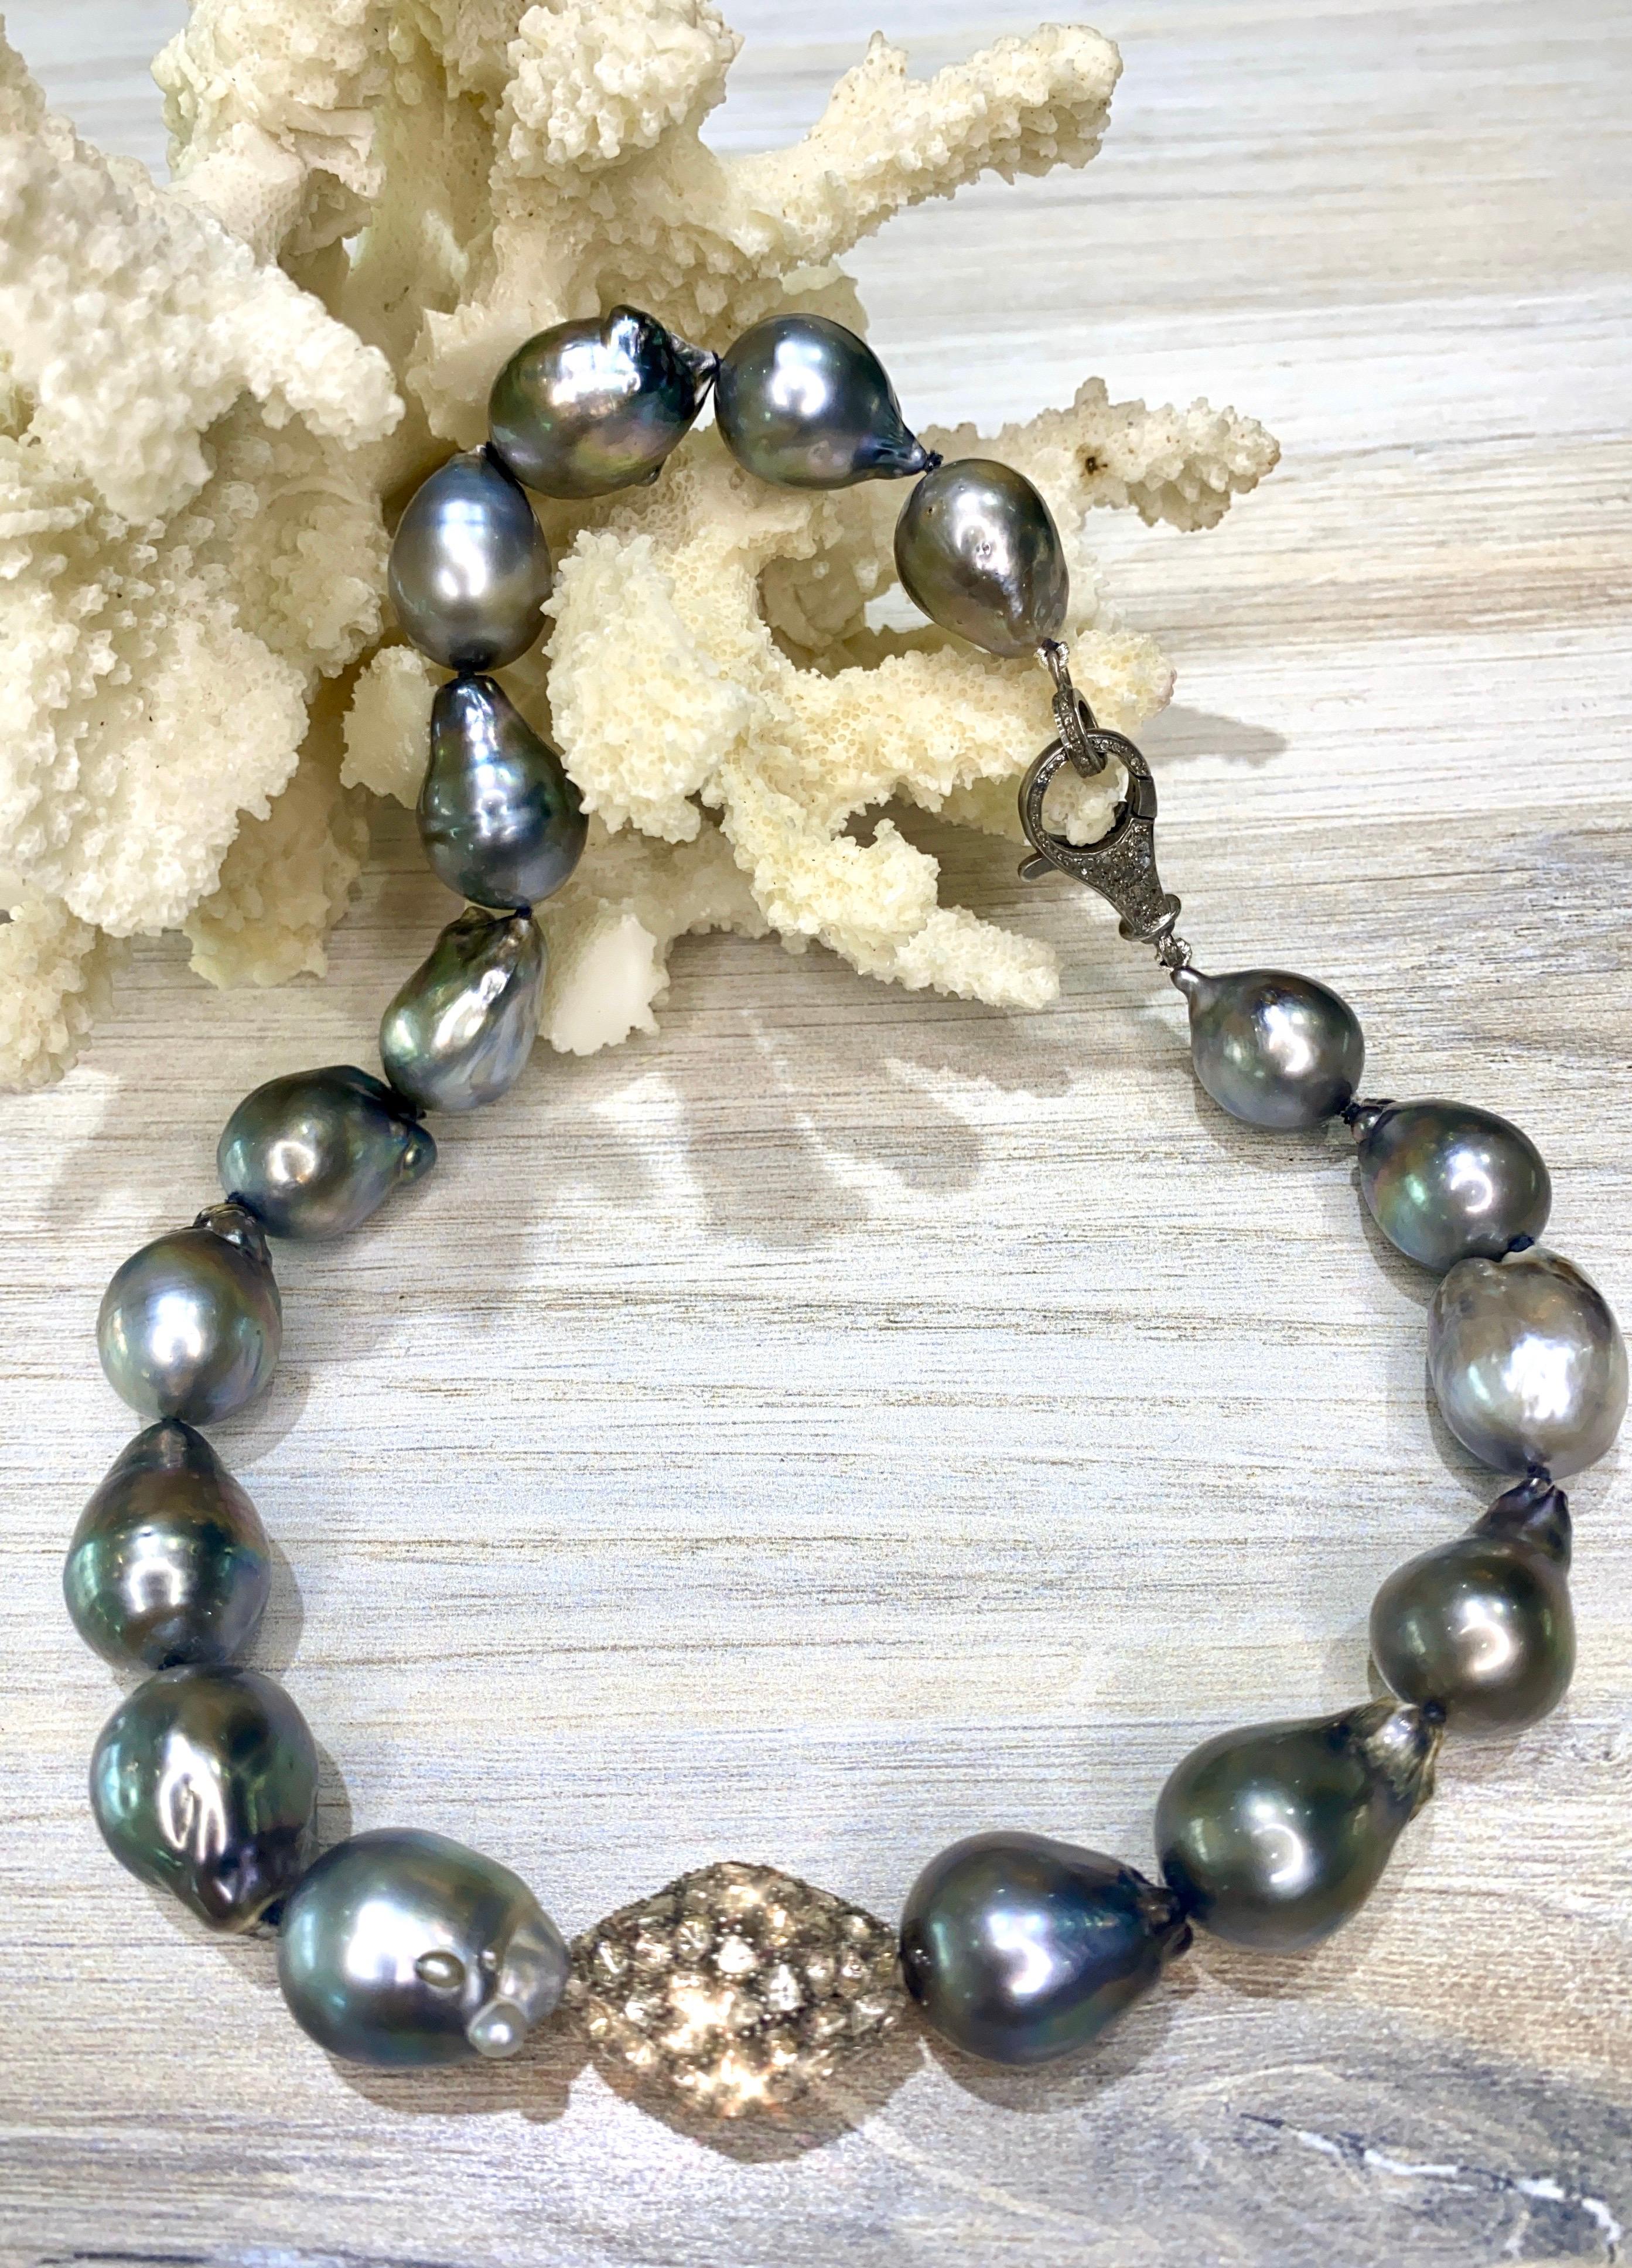 Big beautiful Tahitian pearls are always in style!  This necklace boasts 16 - 17.5 mm HUGE baroque Tahitian pearls, AAA quality, mirror-like luster, and metallic grey color.  The necklace is accented with a large rose-cut diamond bead, 6.5 carats